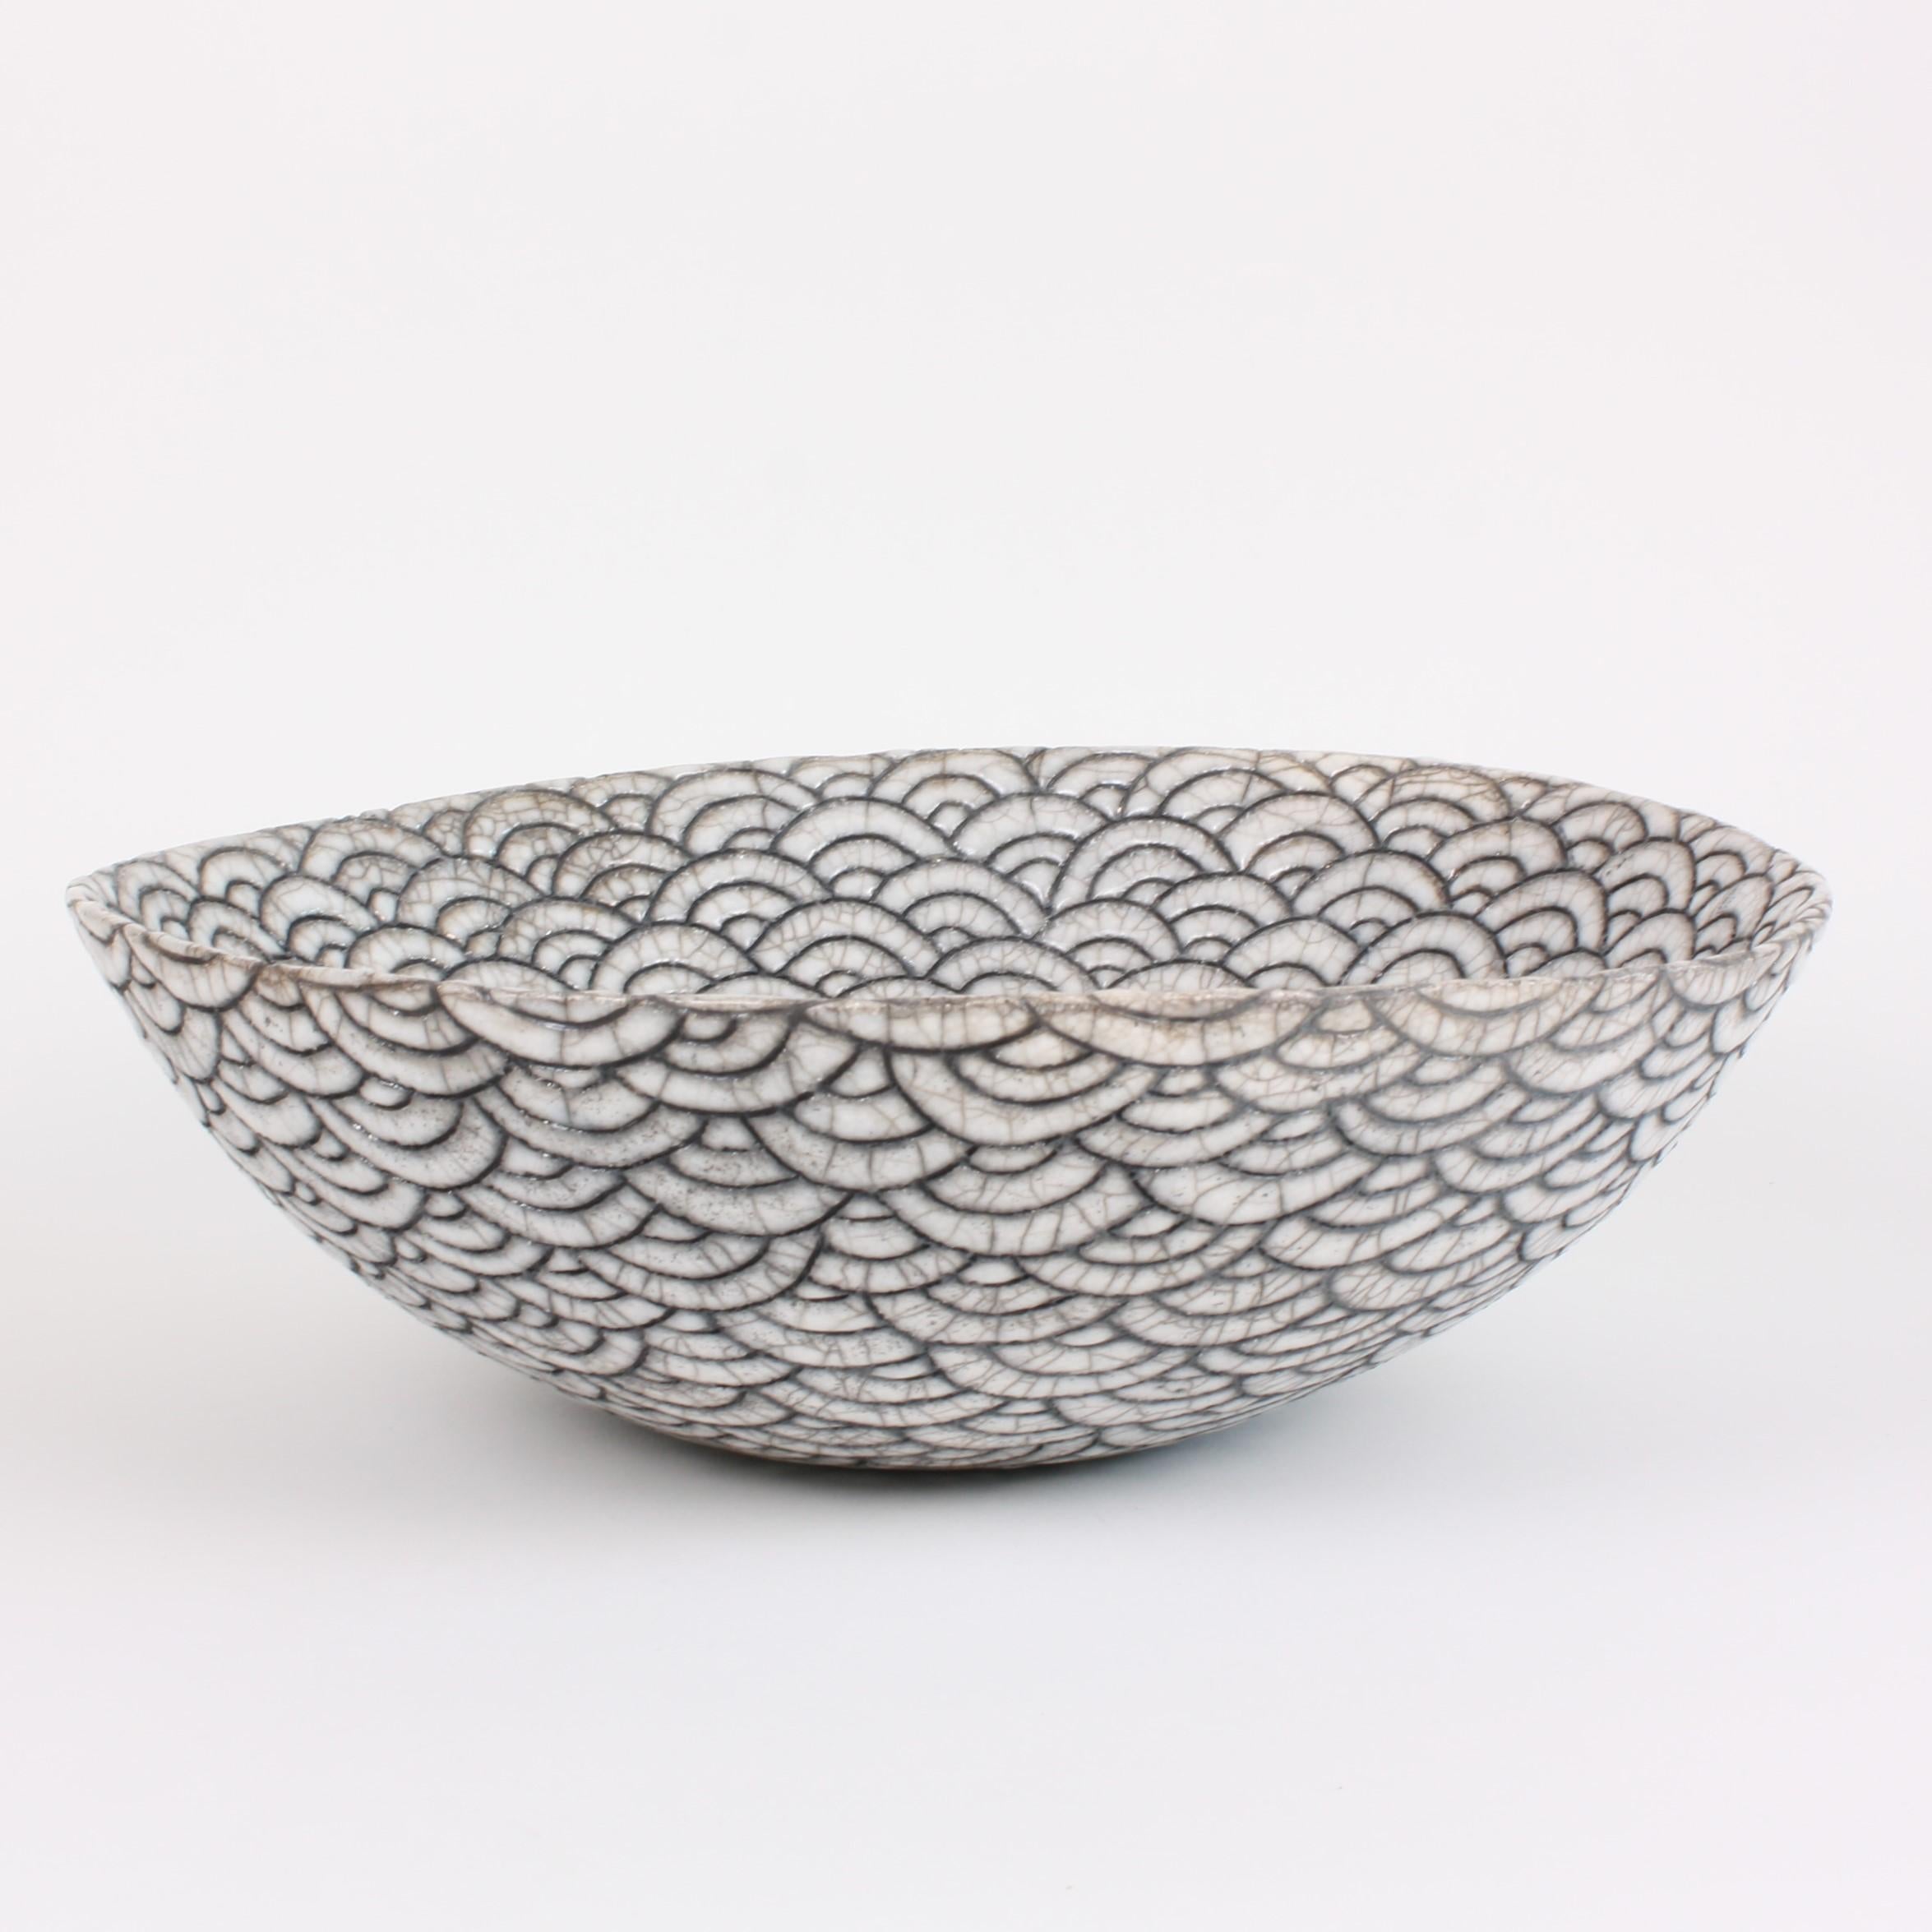 Decorative contemporary black and white ceramic raku coupe by artist Camille Campignion. Inspired by the Japanese seigaiha (or wave motif), the artist has individually engraved, freehand, hundreds of waves on the hand-coiled piece. The distinctive